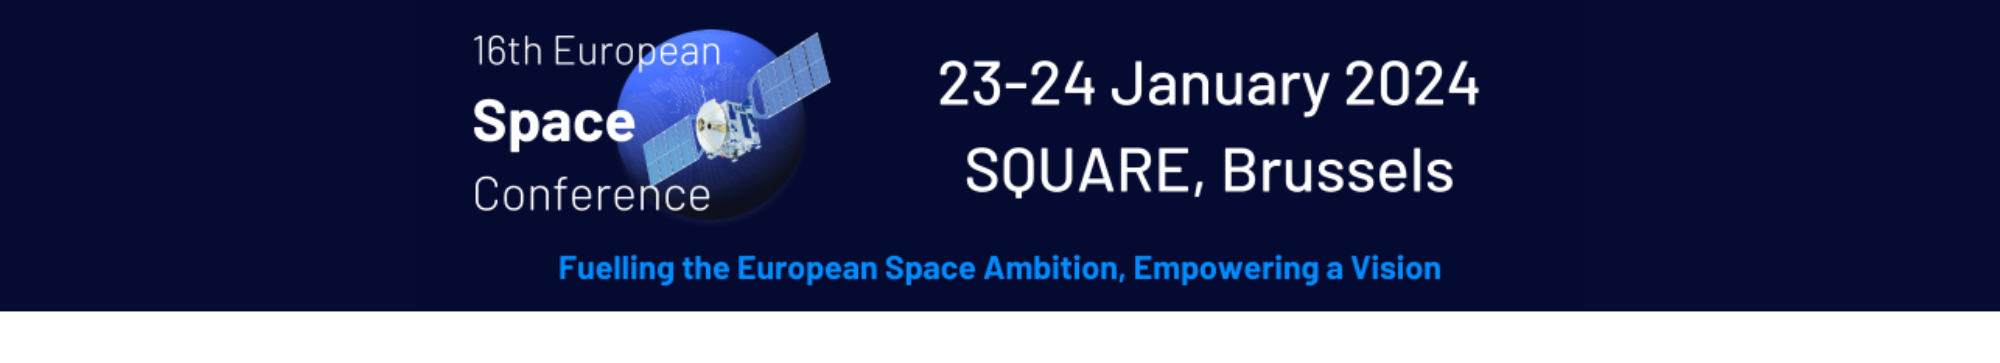 European Space Conference 2024